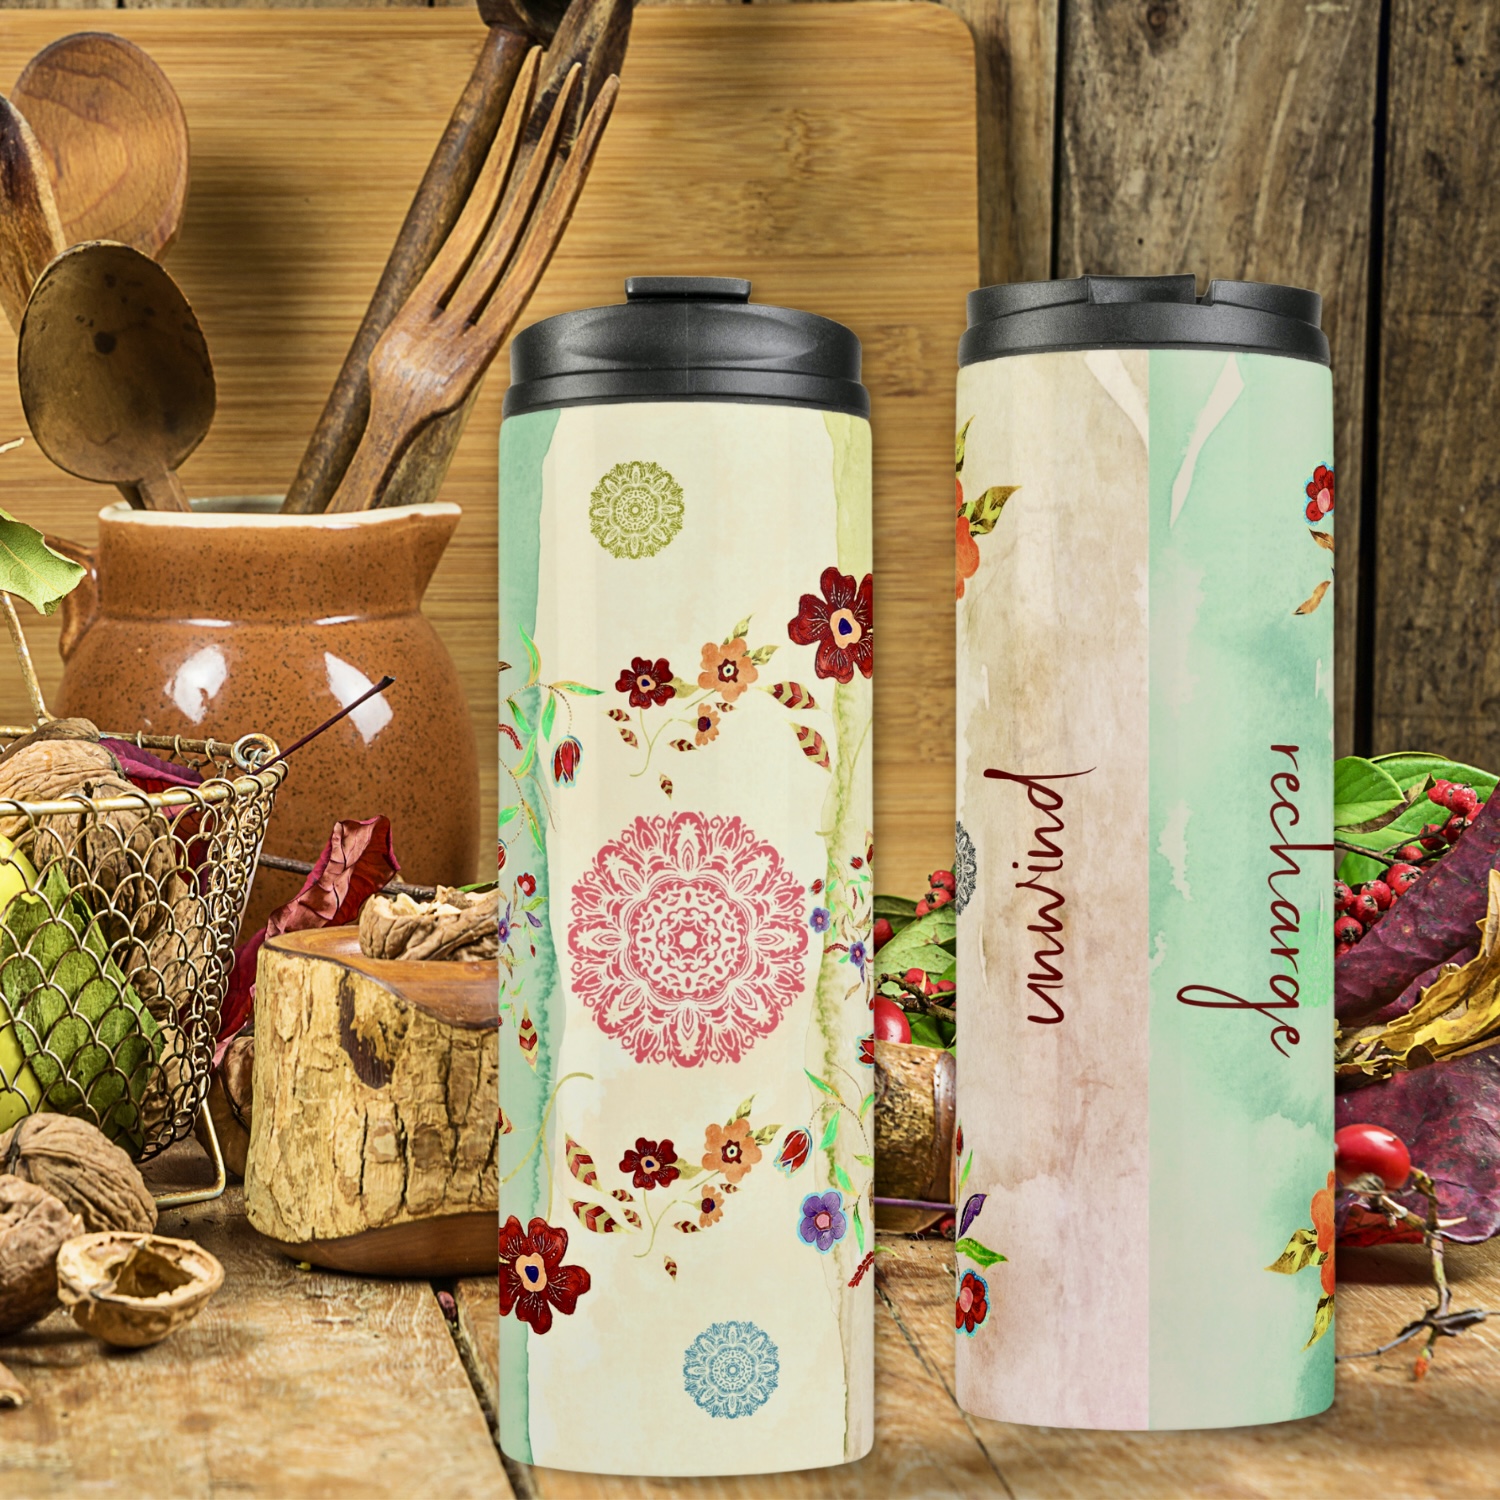 Tranquil tumbler featuring intricate watercolor flower designs and a coral-toned mandala, evoking elegance and tranquility.